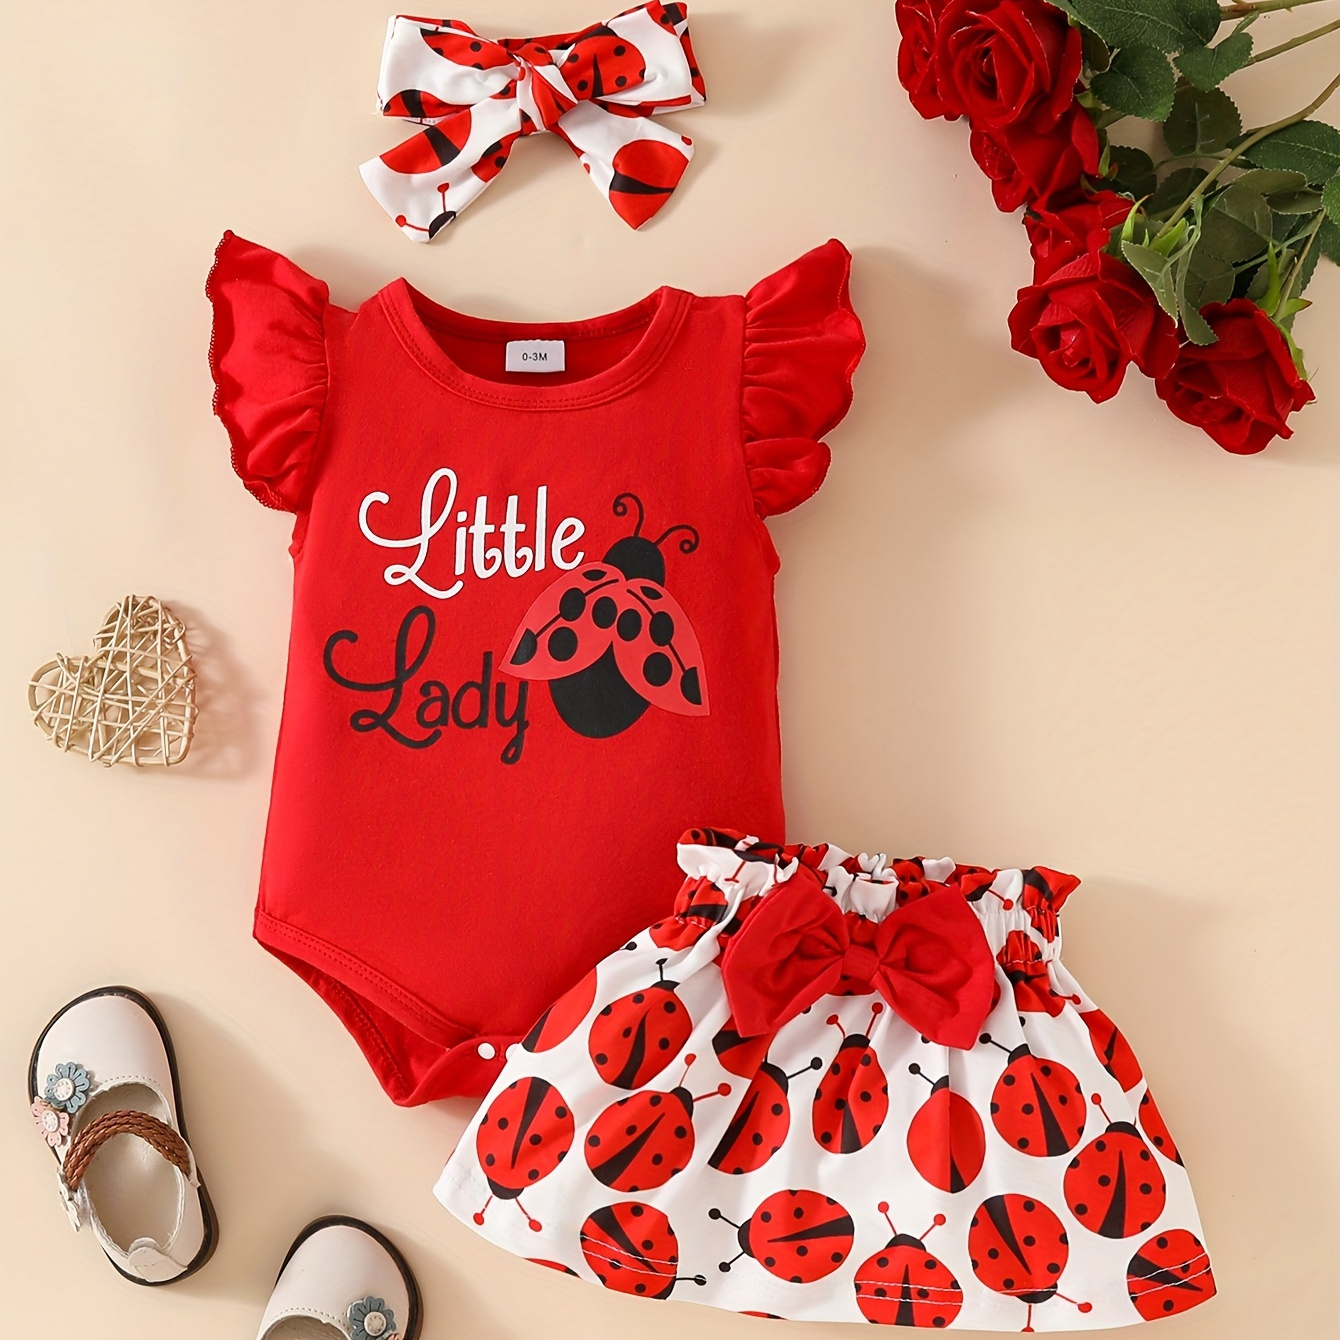 

Baby's "little Lady" Print 2pcs Casual Summer Outfit, Sleeve Onesie & Headband & Ladybug Full Print Skirt Set, Toddler & Infant Girl's Clothes For Daily/holiday, As Gift